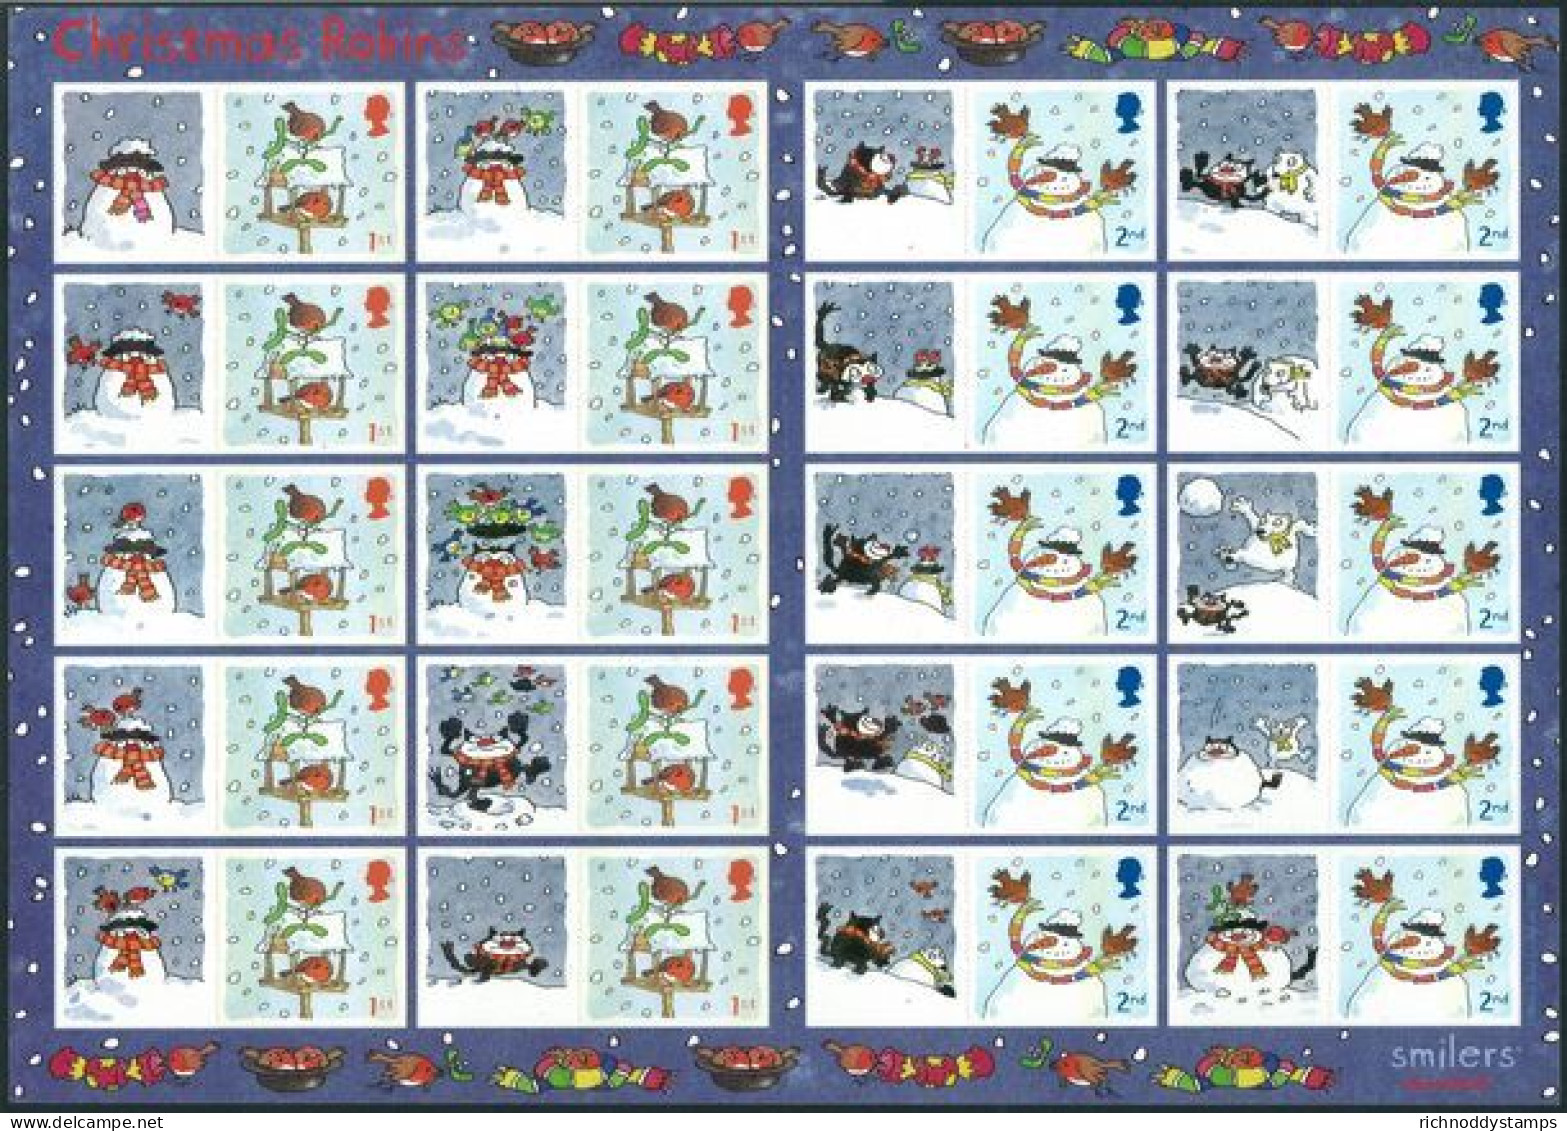 2005 Christmas Robins Smilers Sheet Unmounted Mint.  - Smilers Sheets